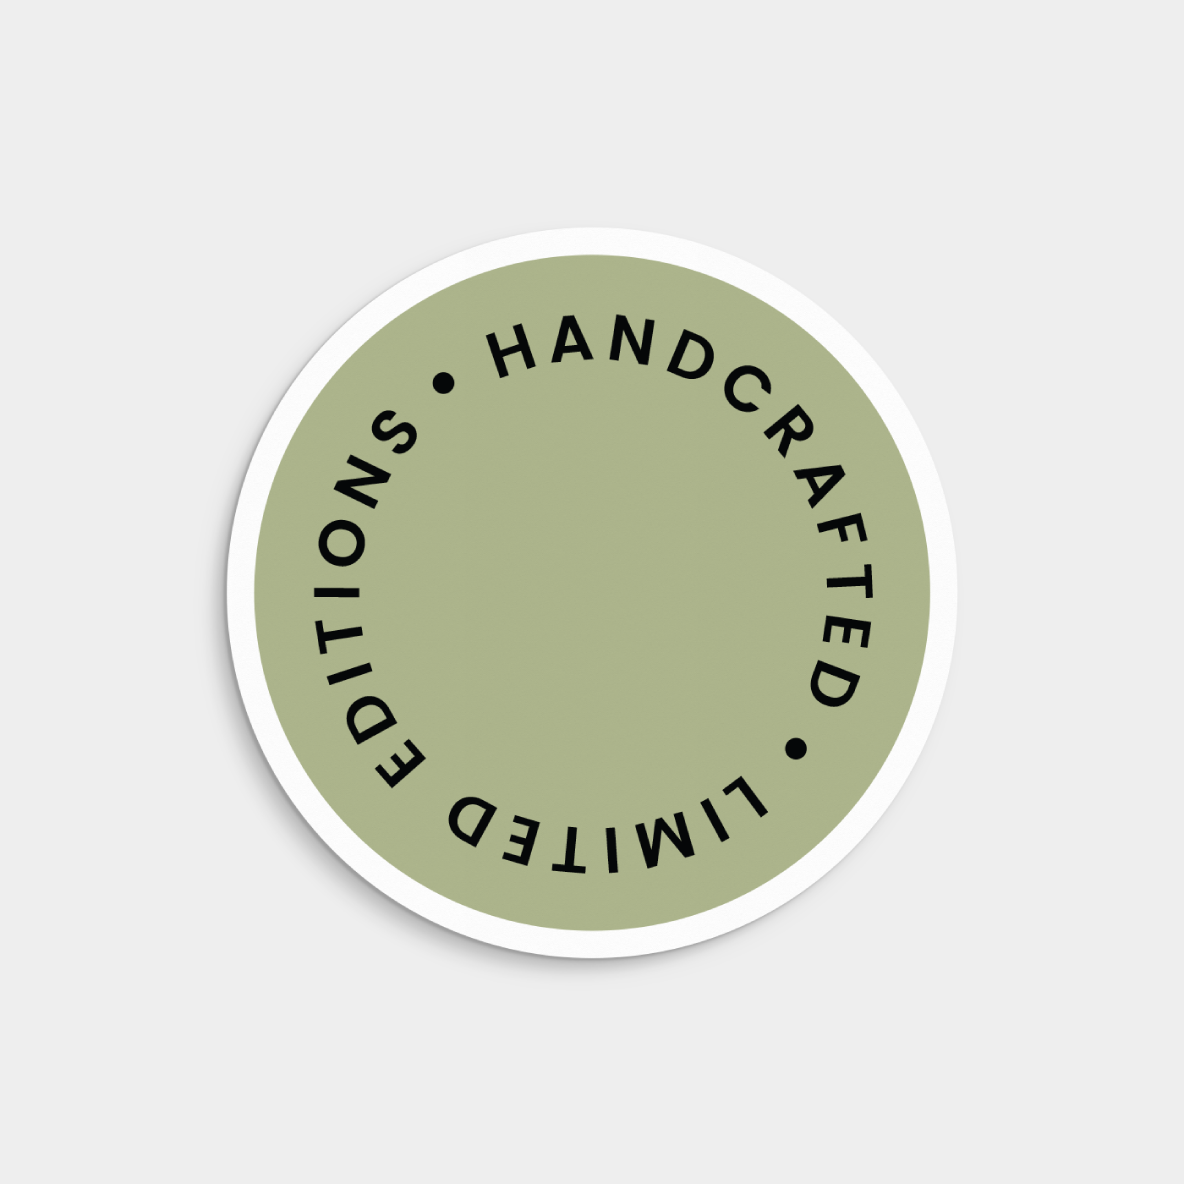 Speckled Circle Product Label with Logo,